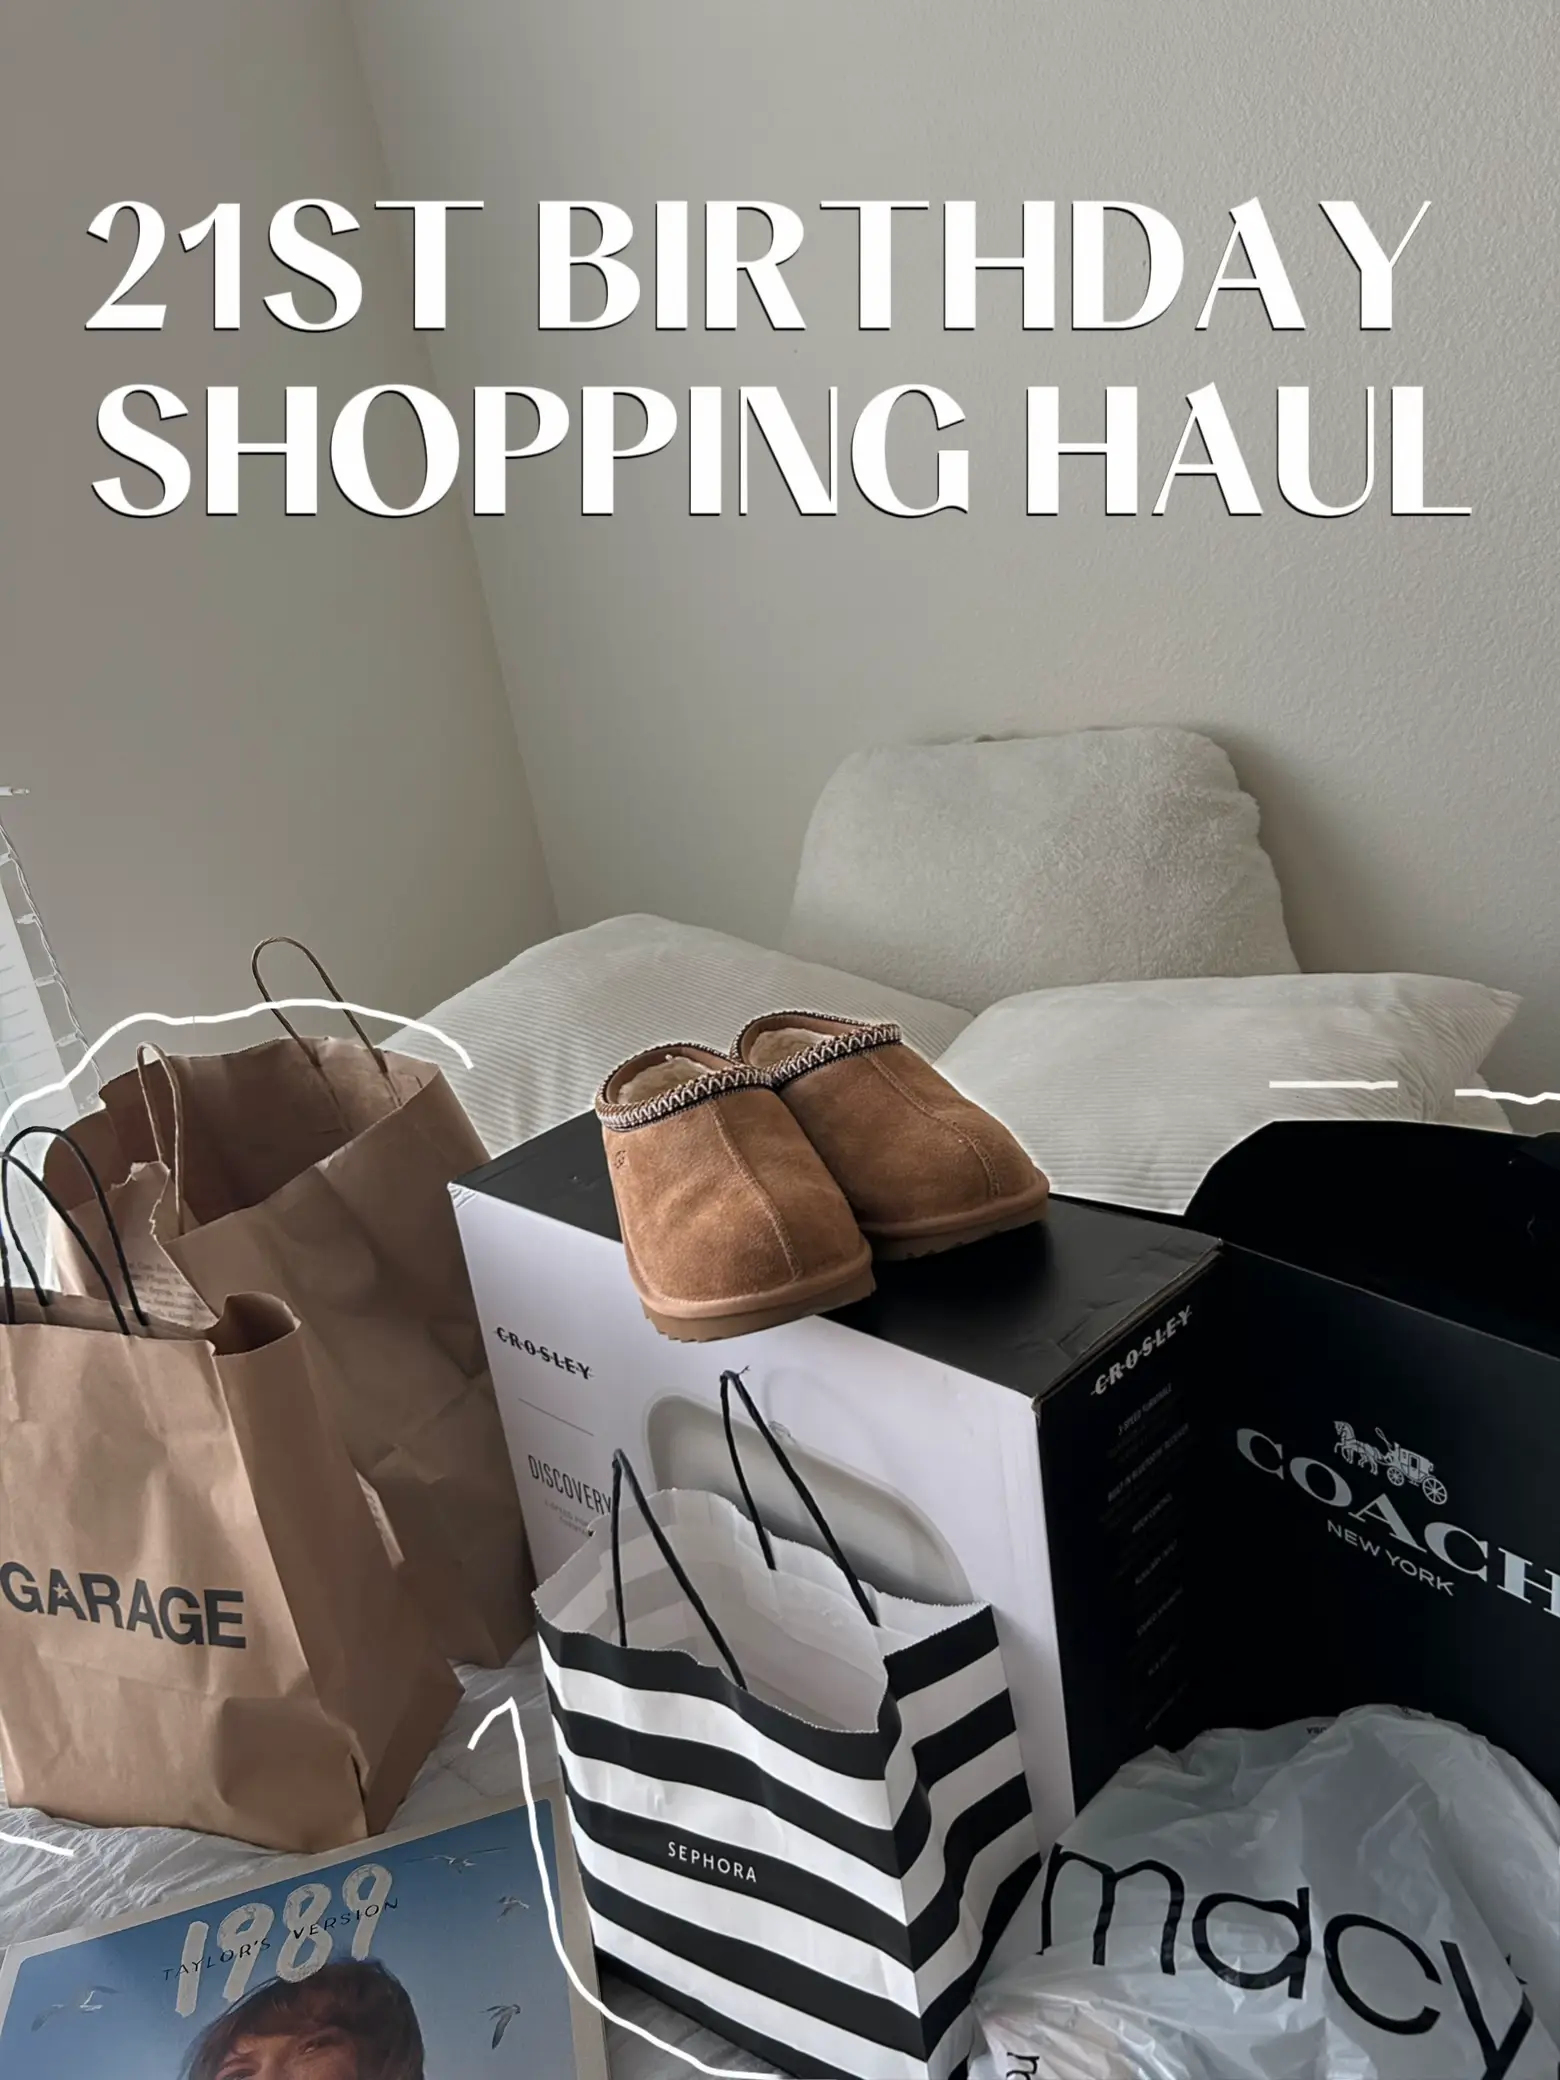 Shopping haul🌸🛍, Gallery posted by haley rich